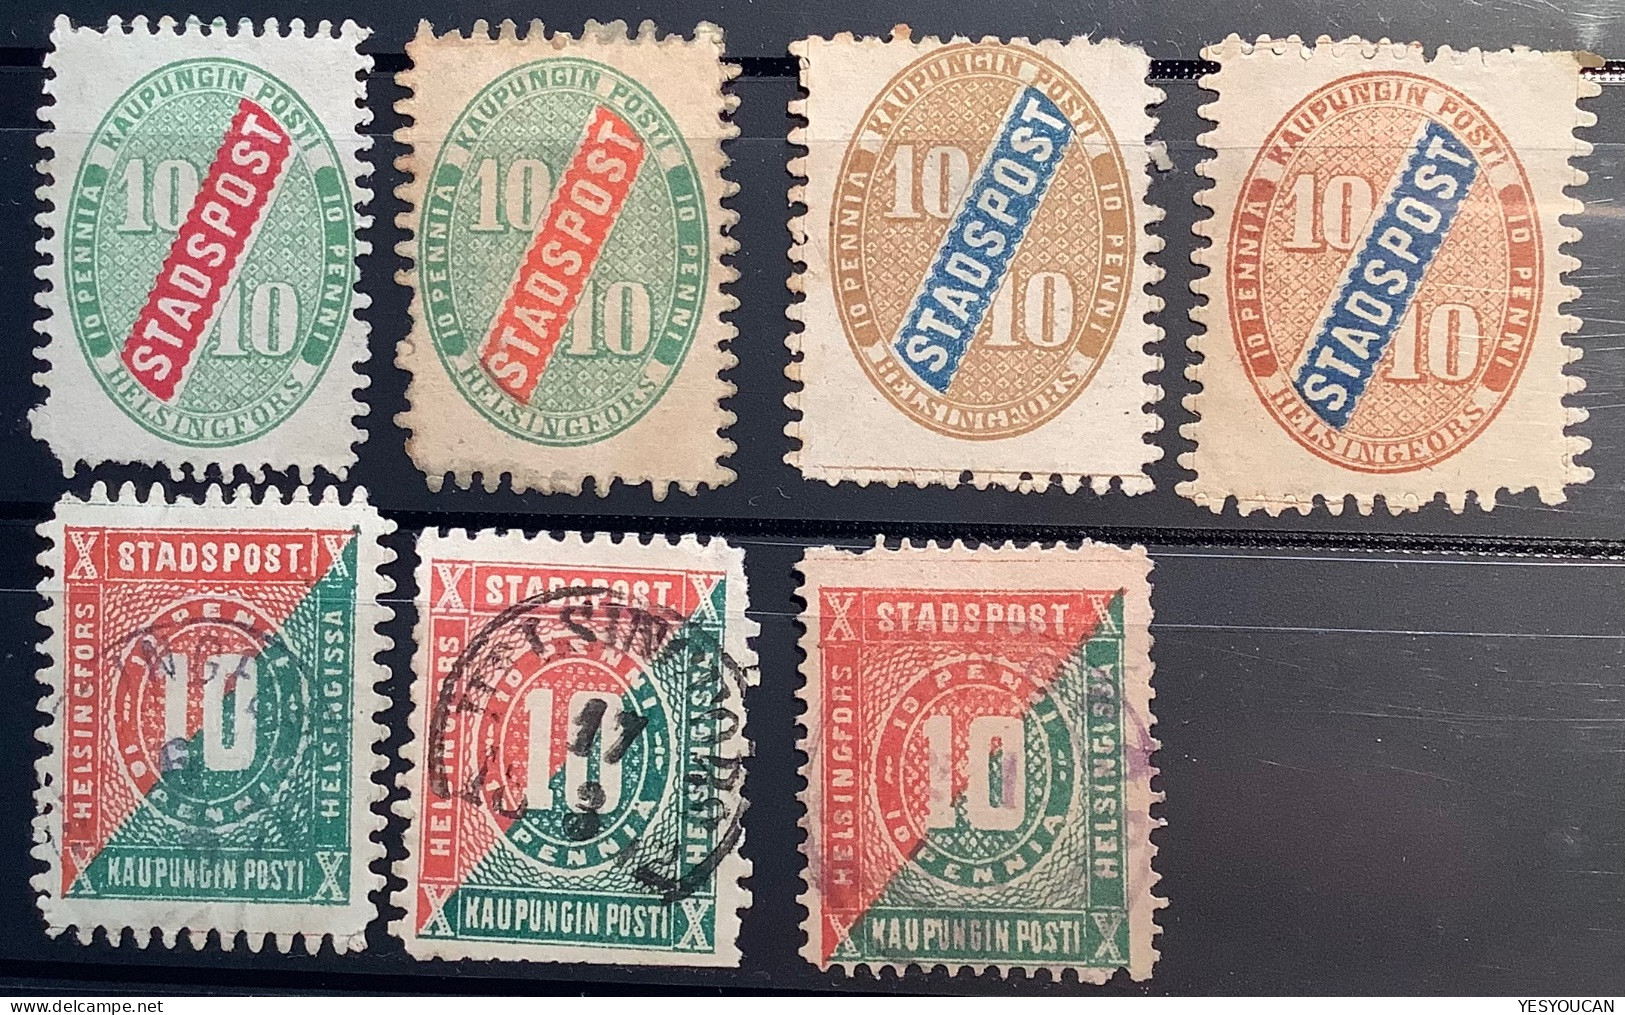 HELSINGFORS STADSPOST 1866-1883 10 Penni Helsinki City Post 7 Ex. (Finland Local Finlande Poste Locale - Local Post Stamps